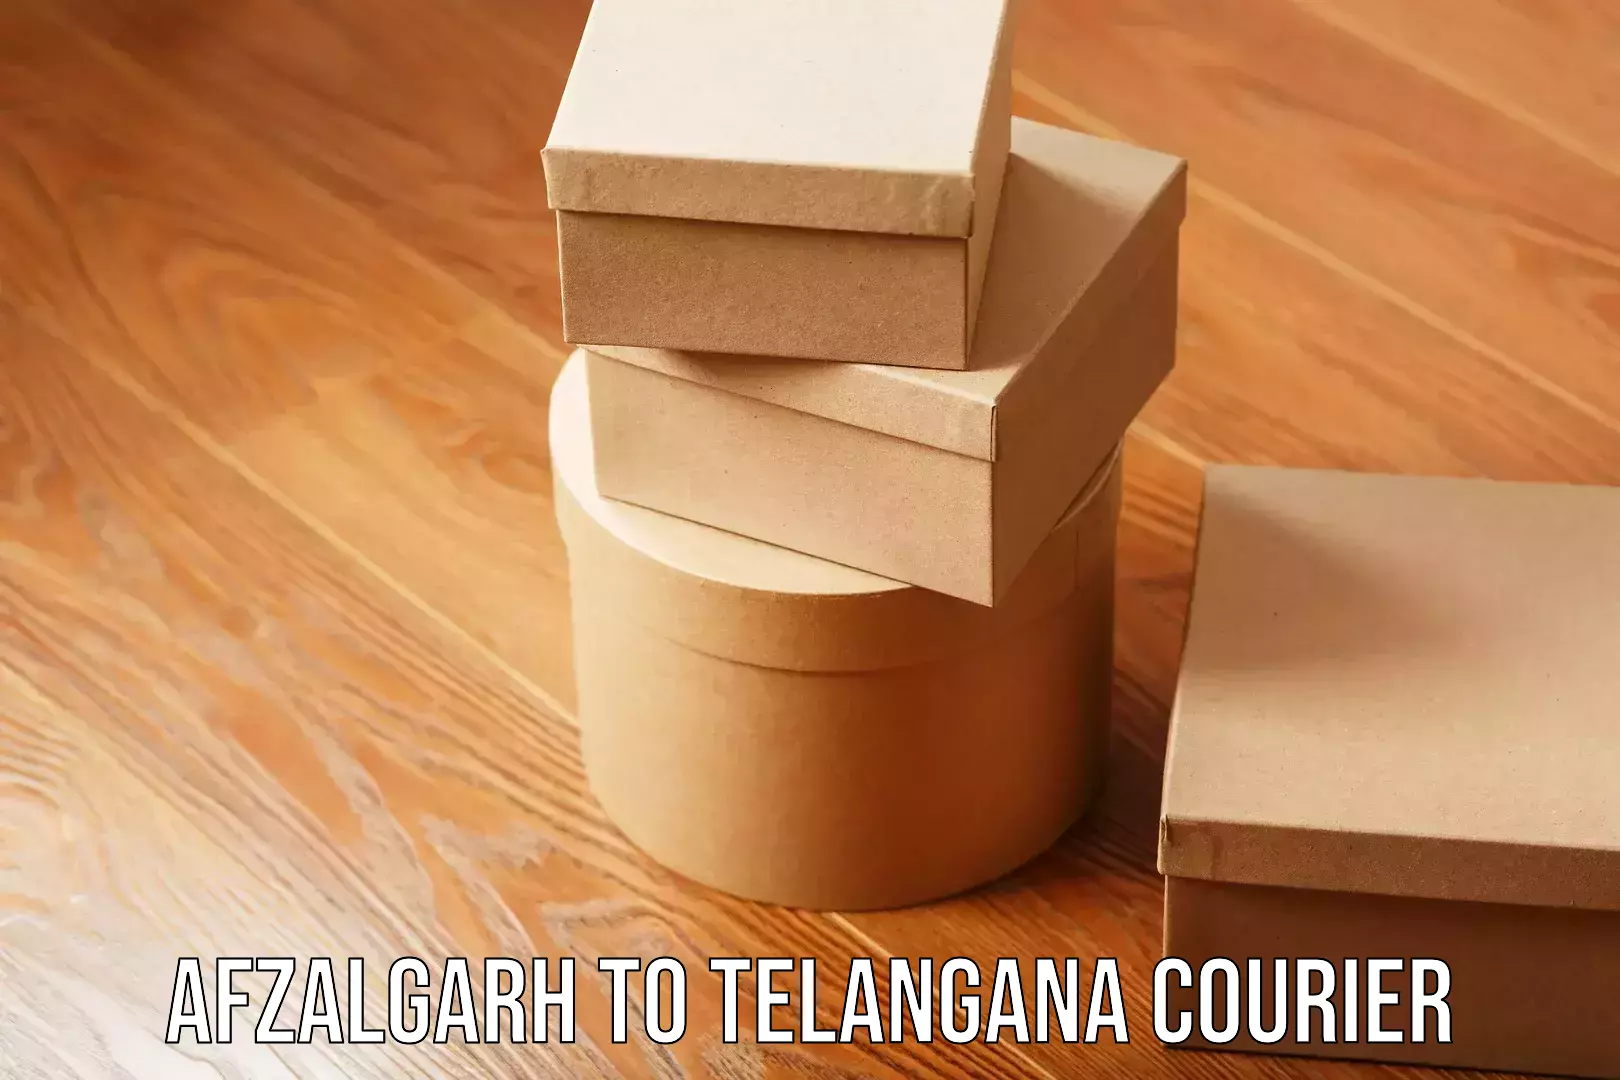 On-time delivery services Afzalgarh to Telangana